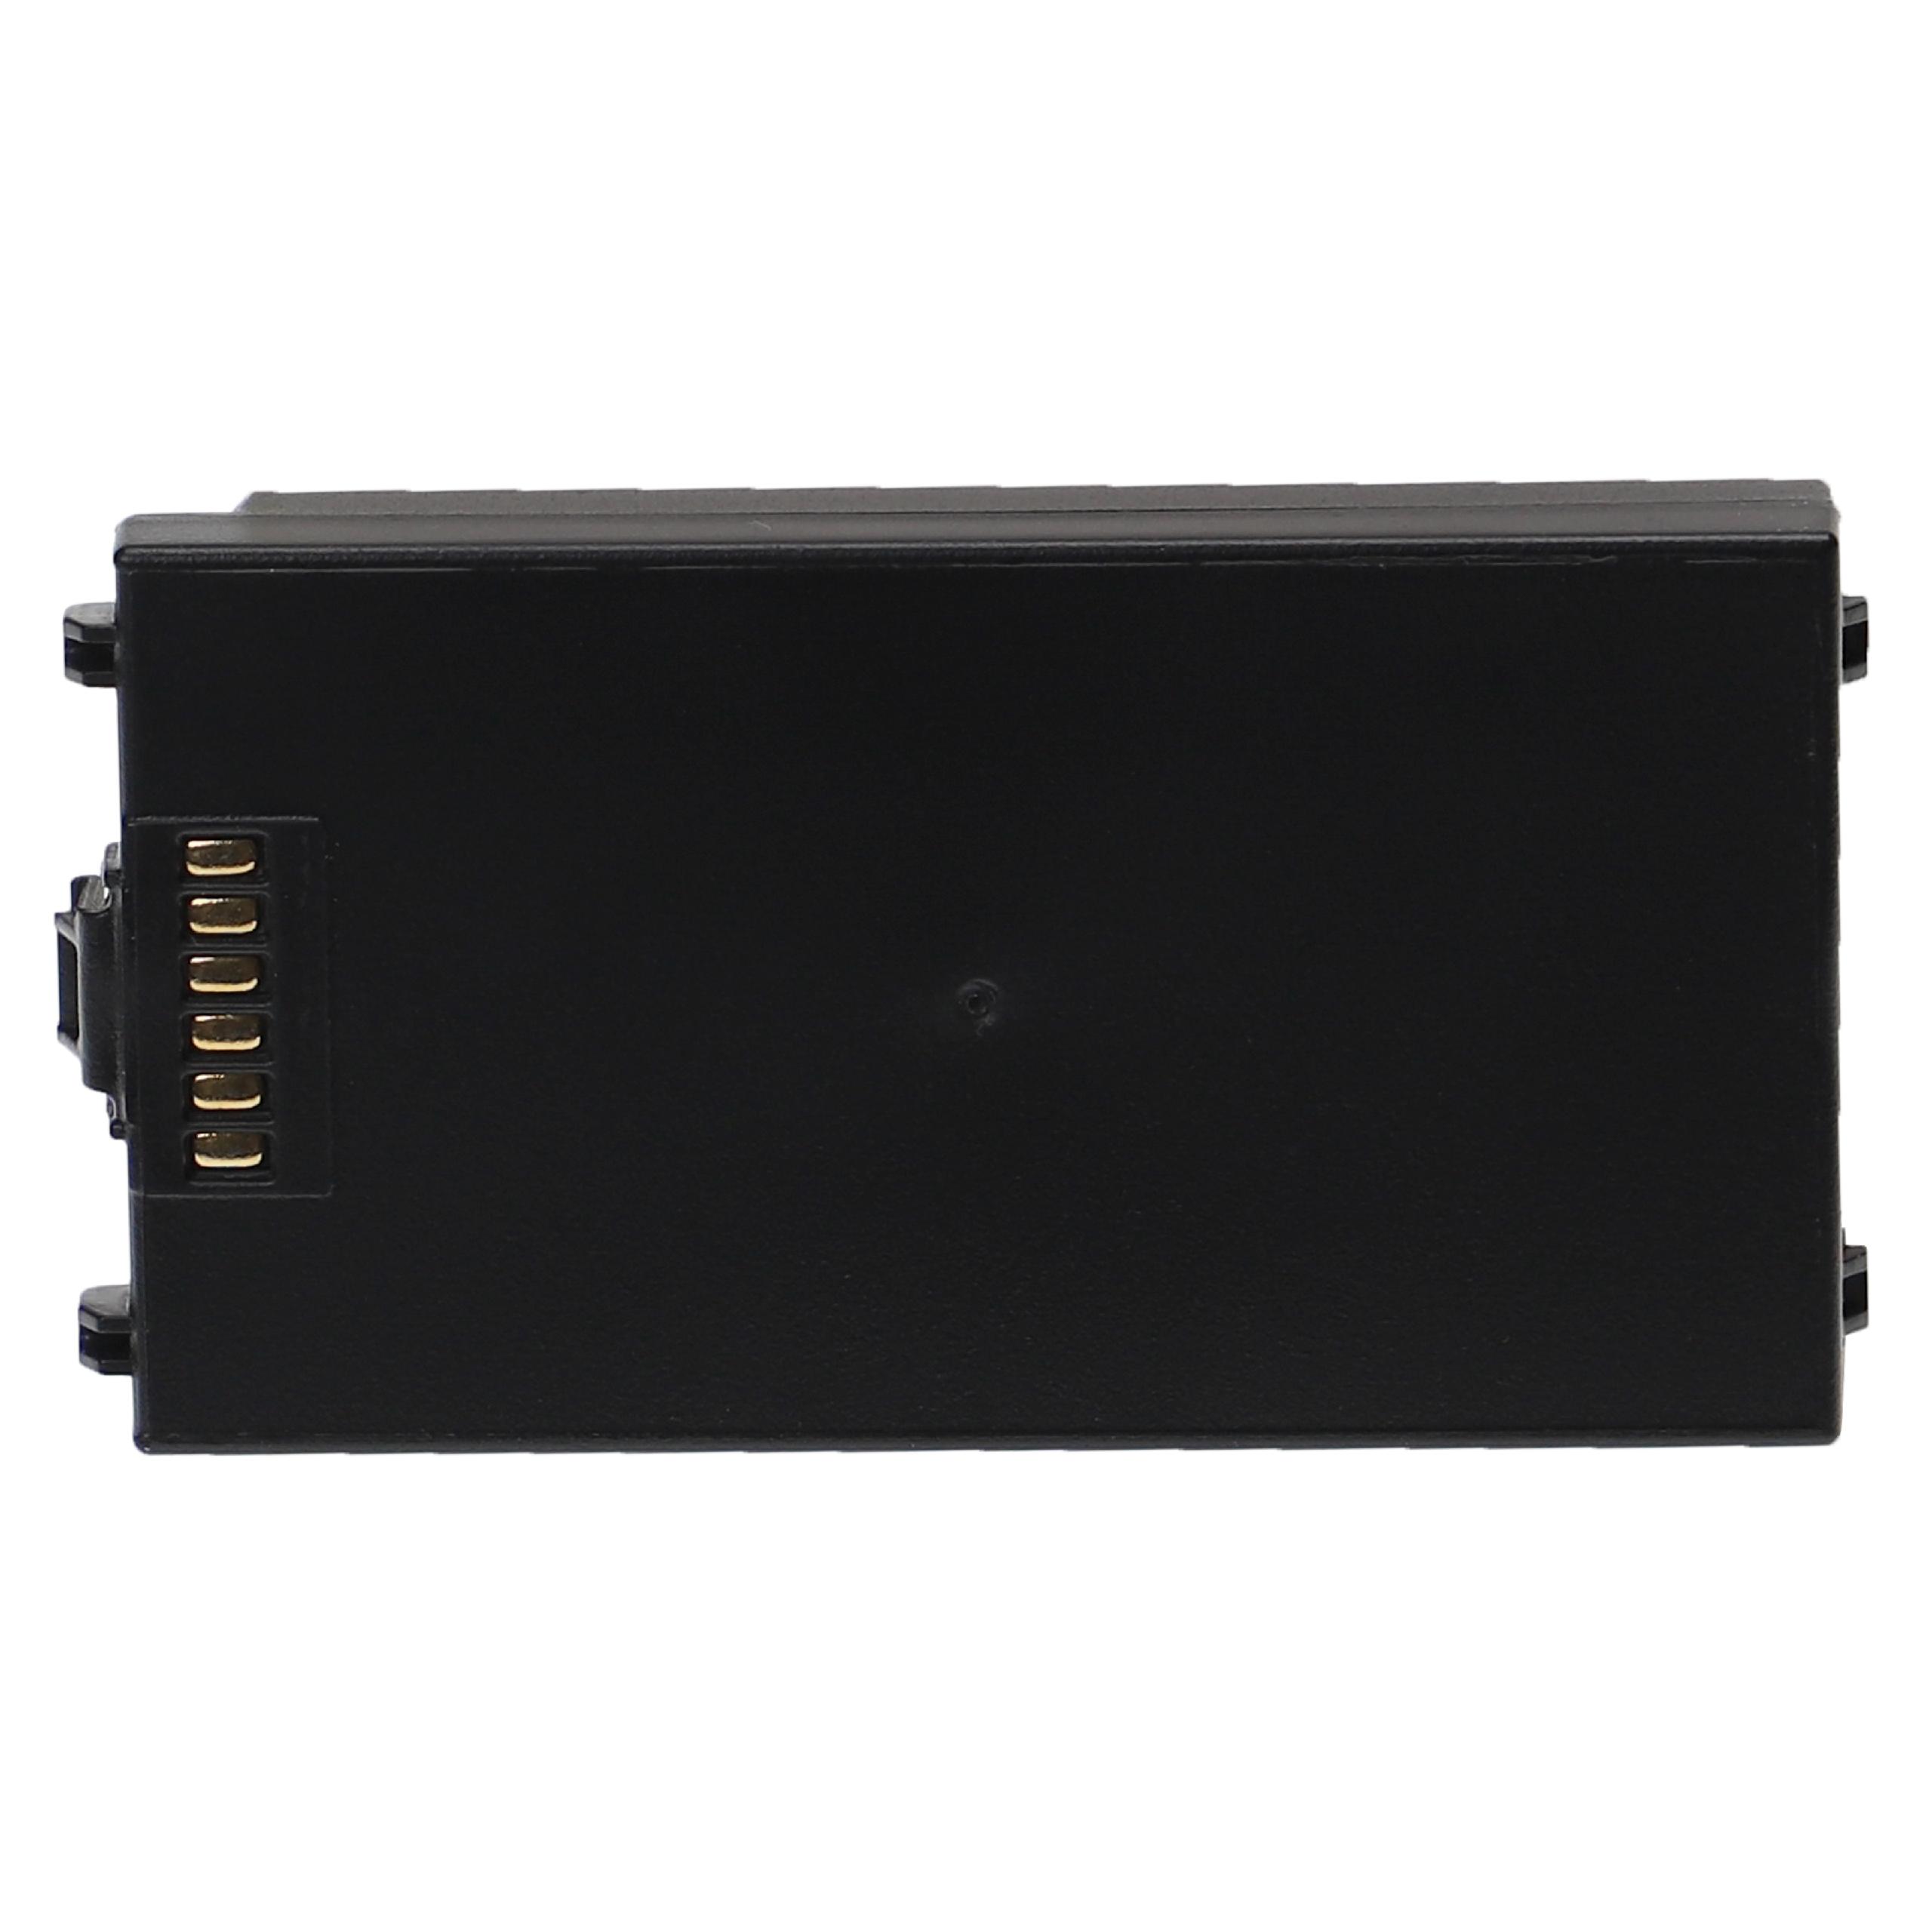 Barcode Scanner POS Battery Replacement for Symbol 55-002148-01, 55-0211152-02 - 4400mAh 3.7V Li-Ion